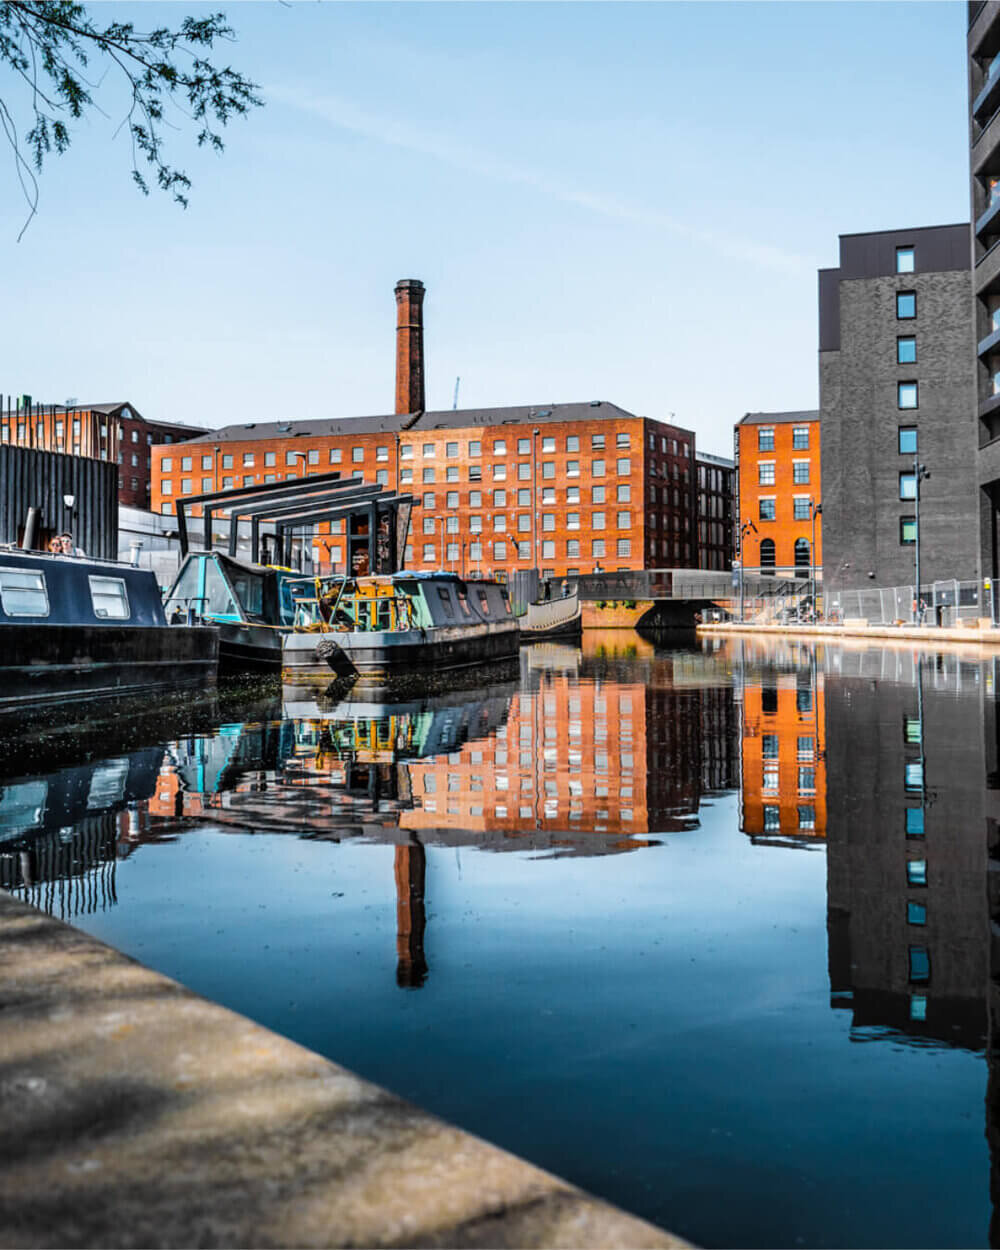 Orange brick mill reflected in the canal at New Islington Marina in Ancoats, Manchester